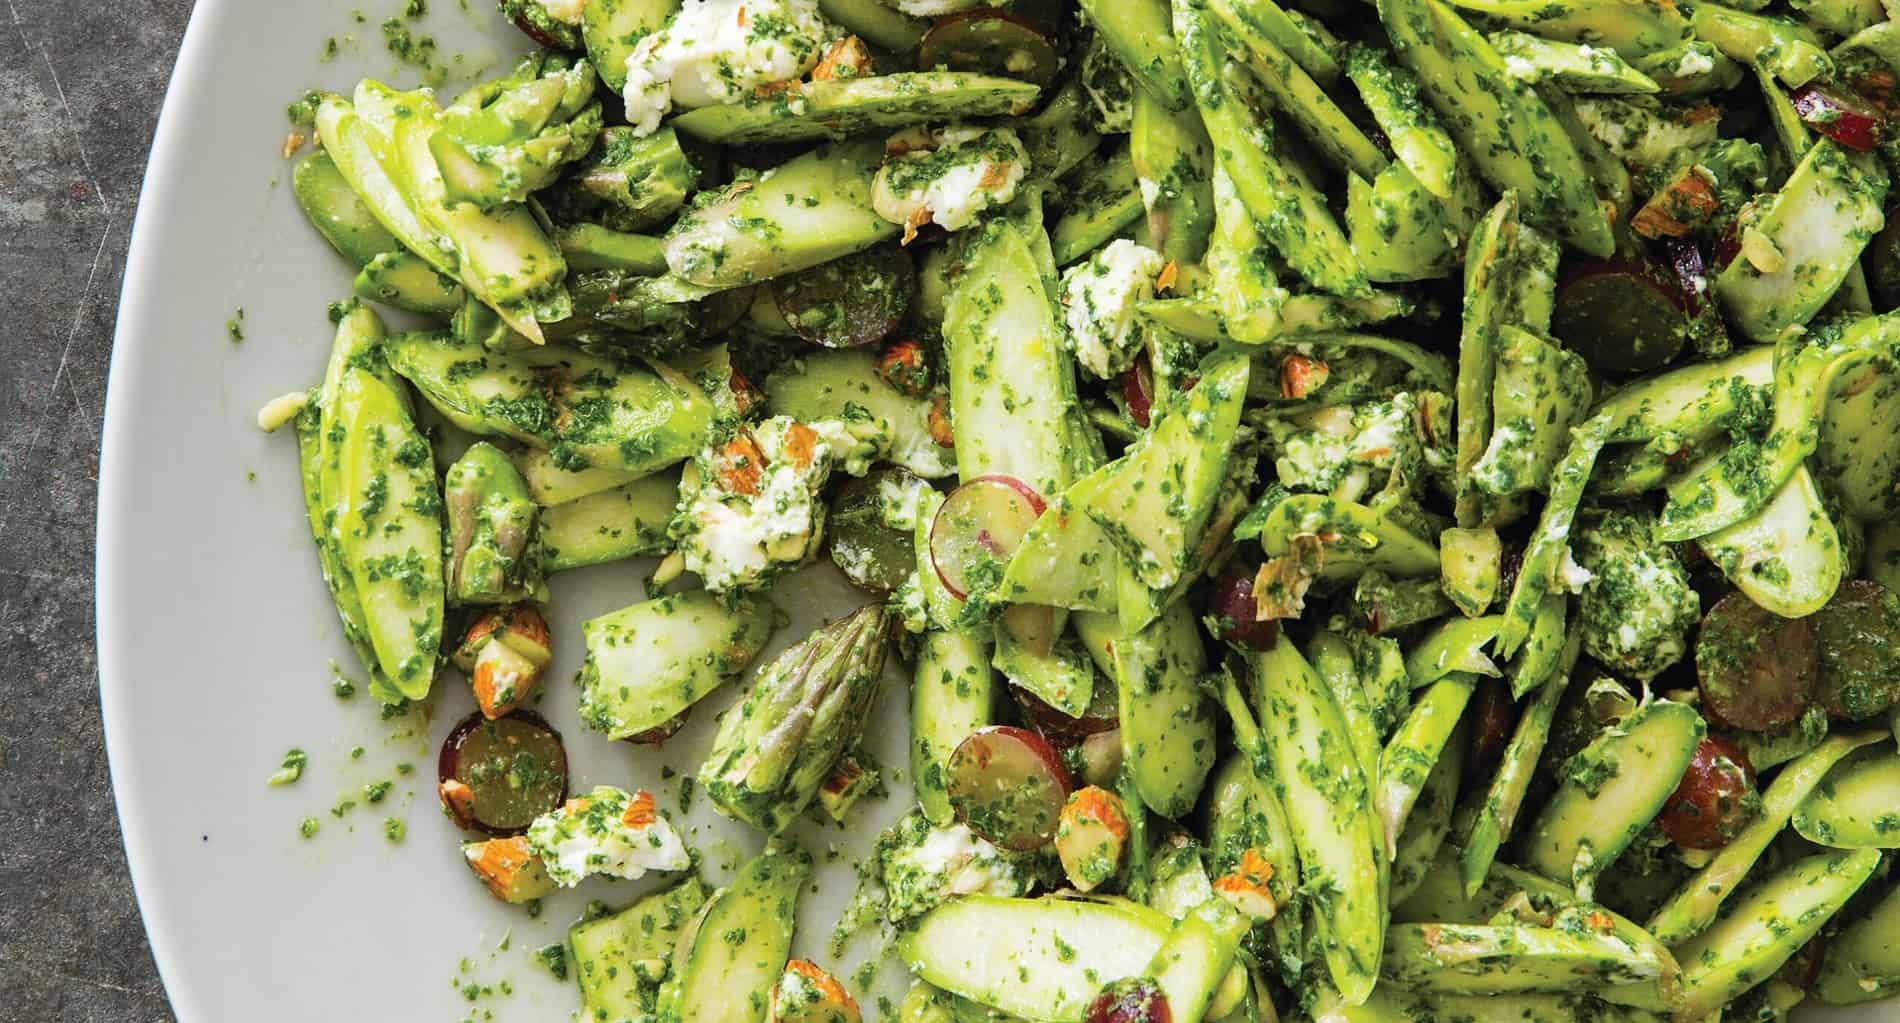 Raw asparagus makes a lasting impression in this spring salad